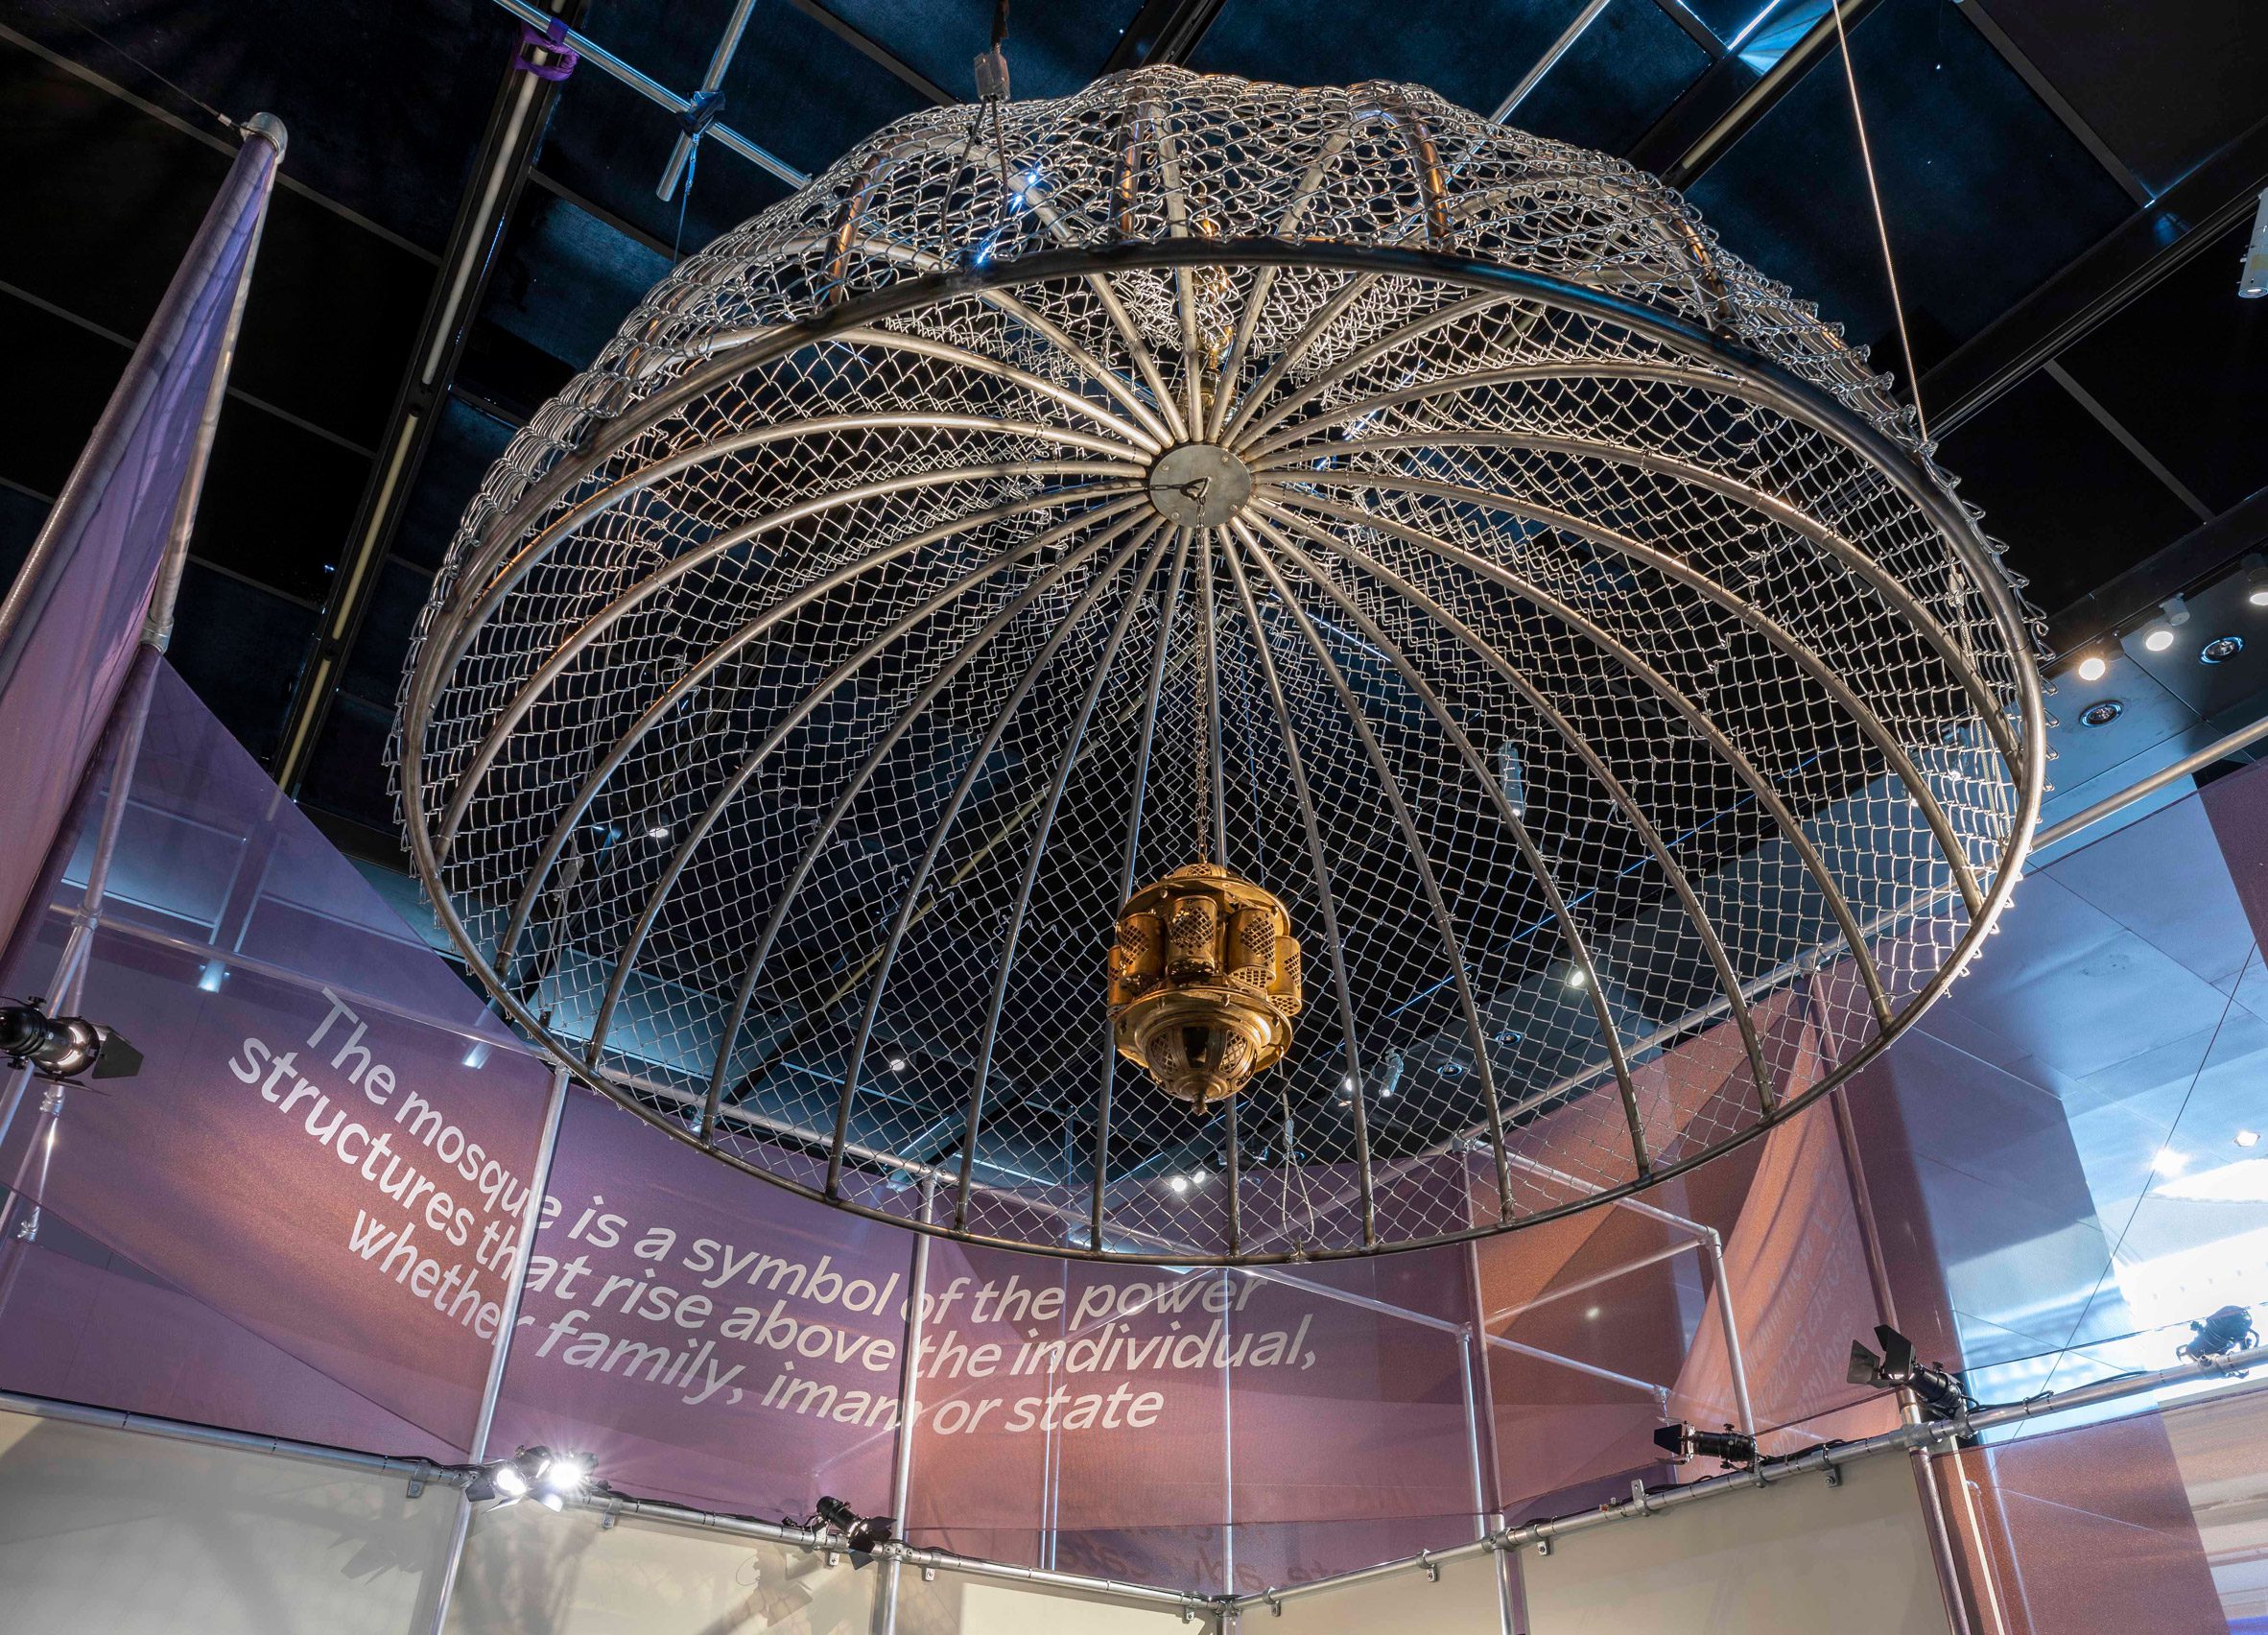 The dome of Aljan Gharem's installation in the V&A's Jameel Prize exhibition